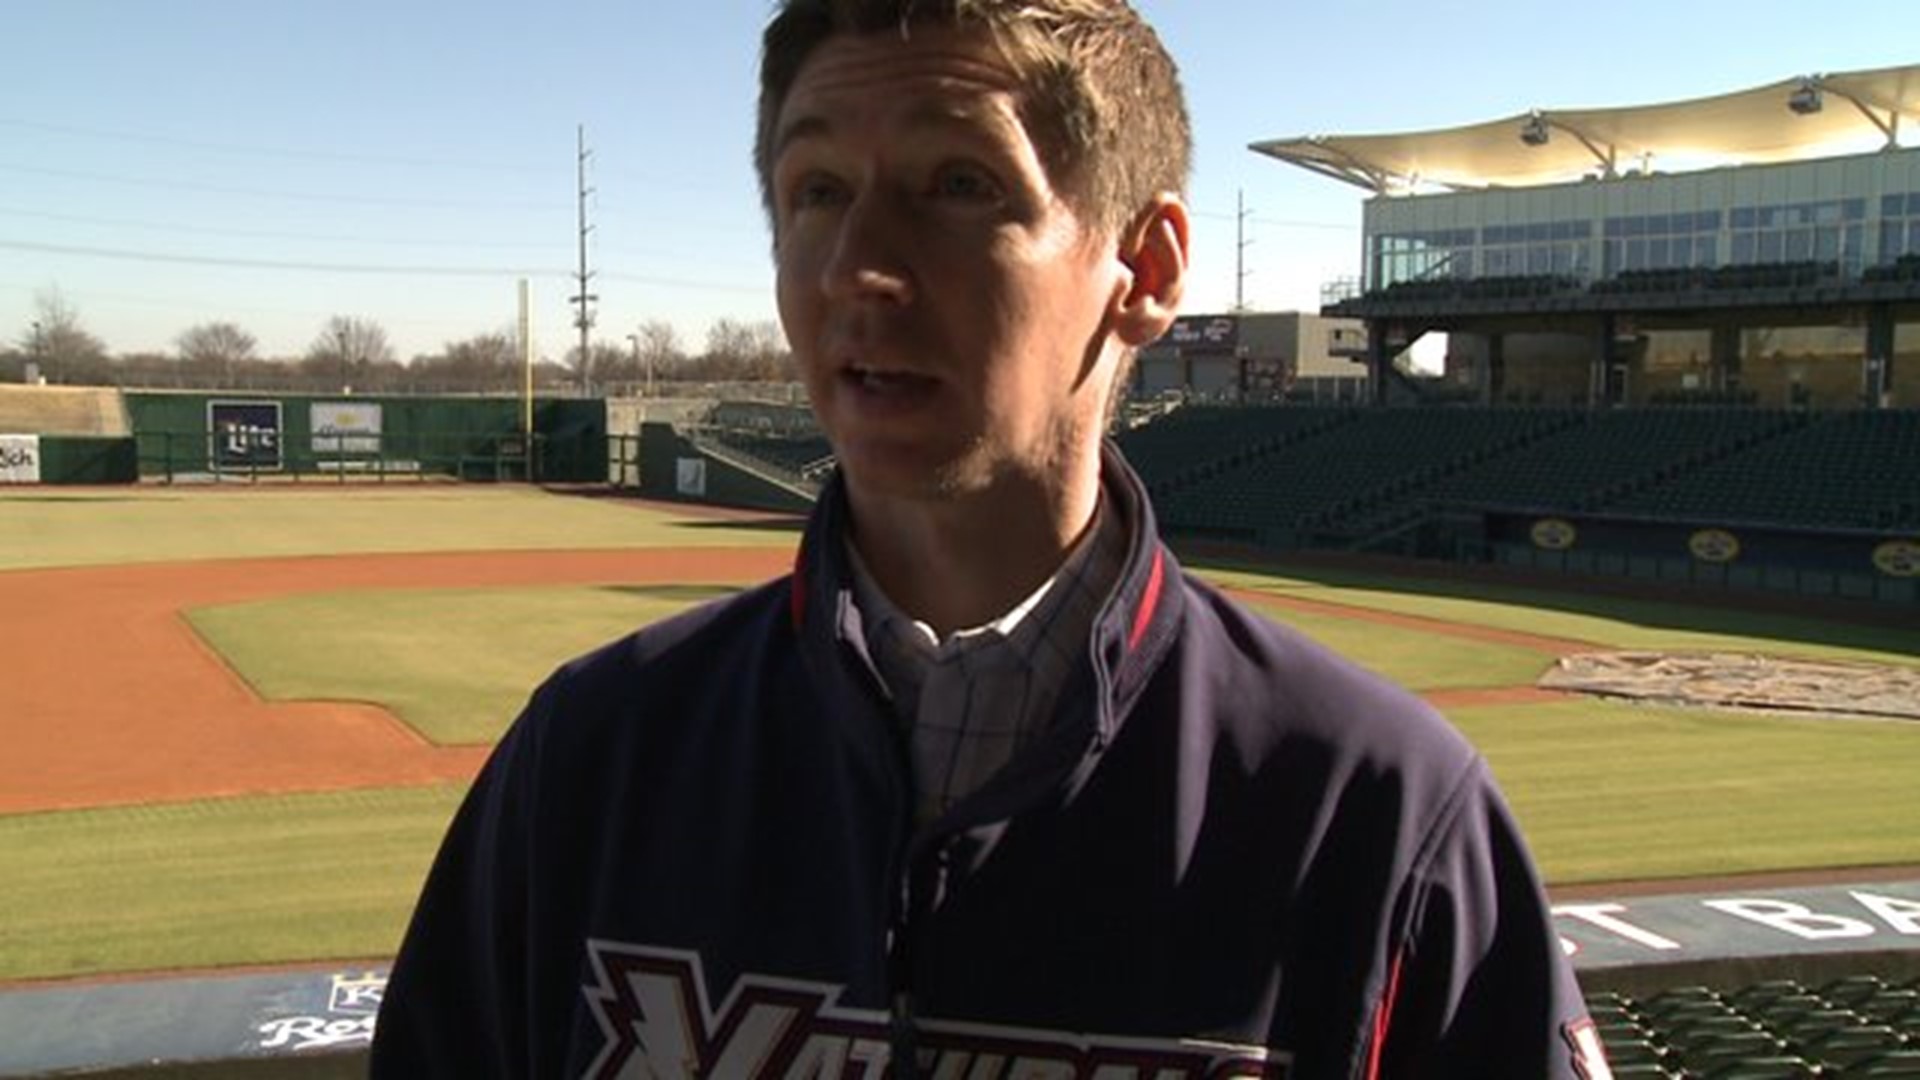 VIDEO: Naturals GM Justin Cole Reflects On Impact Of Yordano Ventura